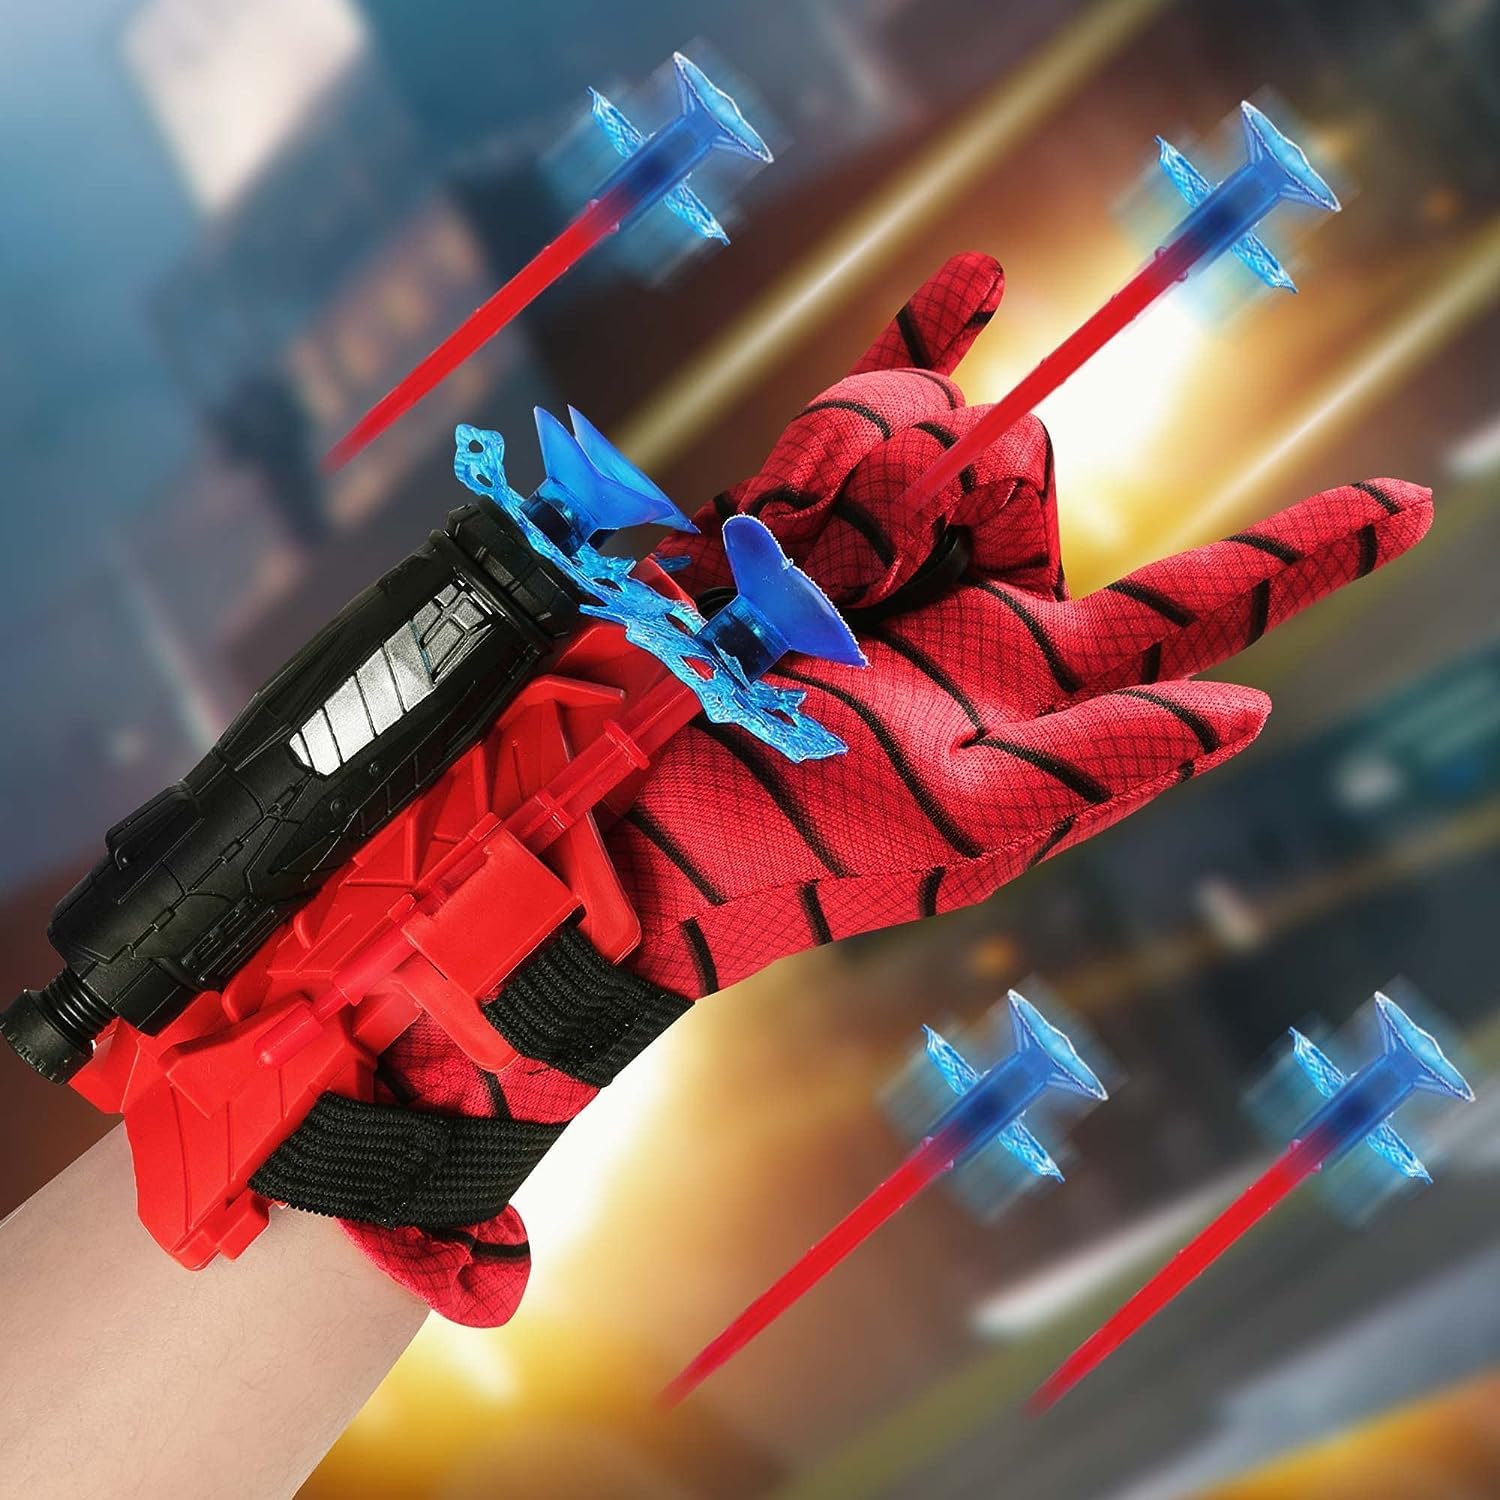 Spiderman Glove Web Launcher With Suction Cup Soft Dart Targeting Toy